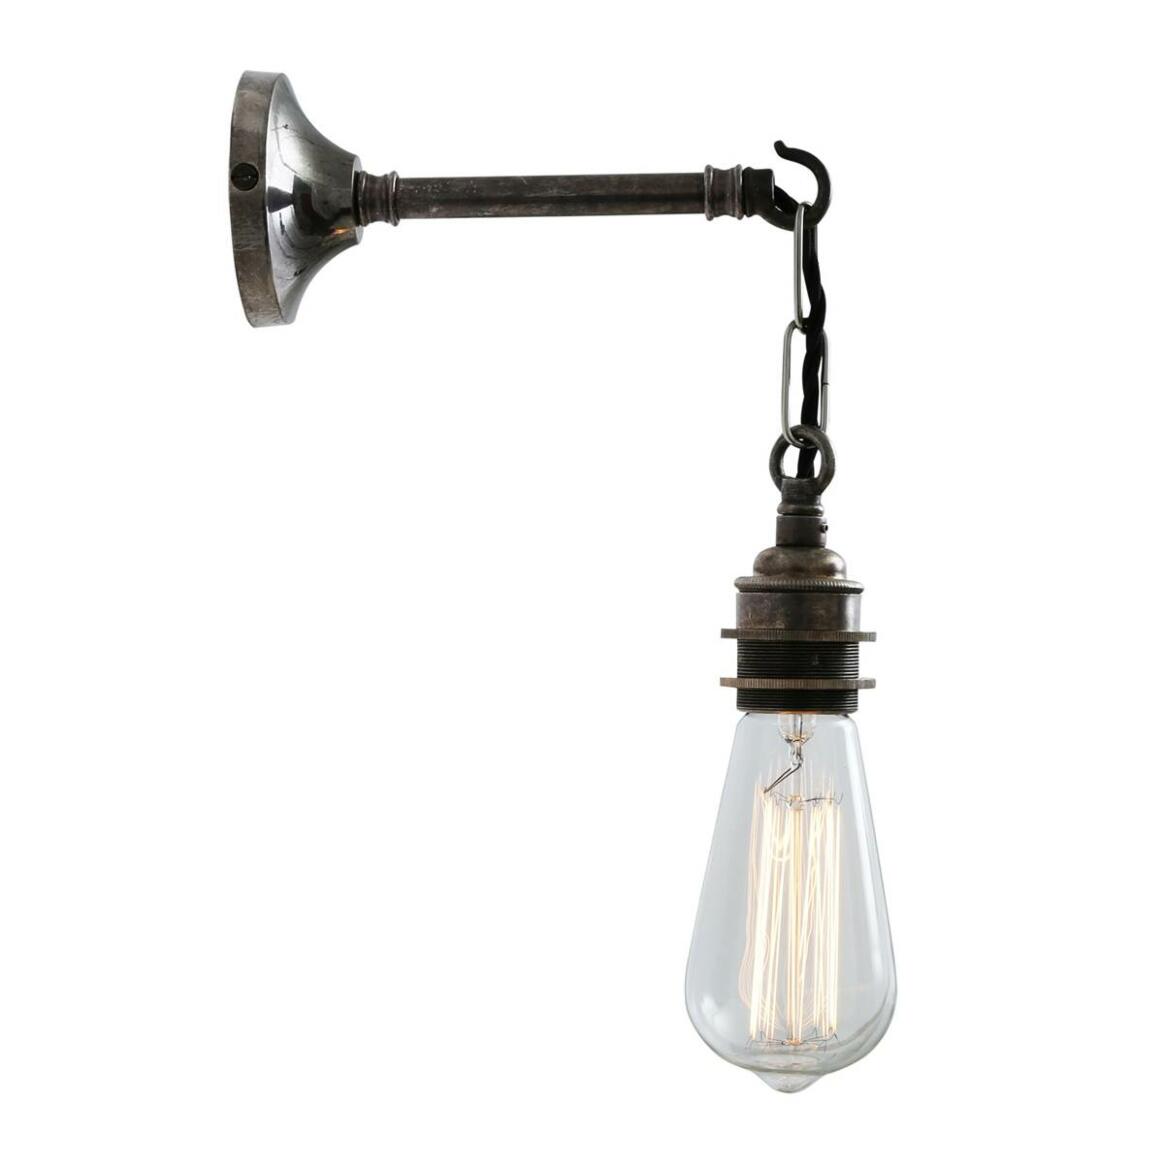 Prei Industrial Bare Bulb Wall Light main product image